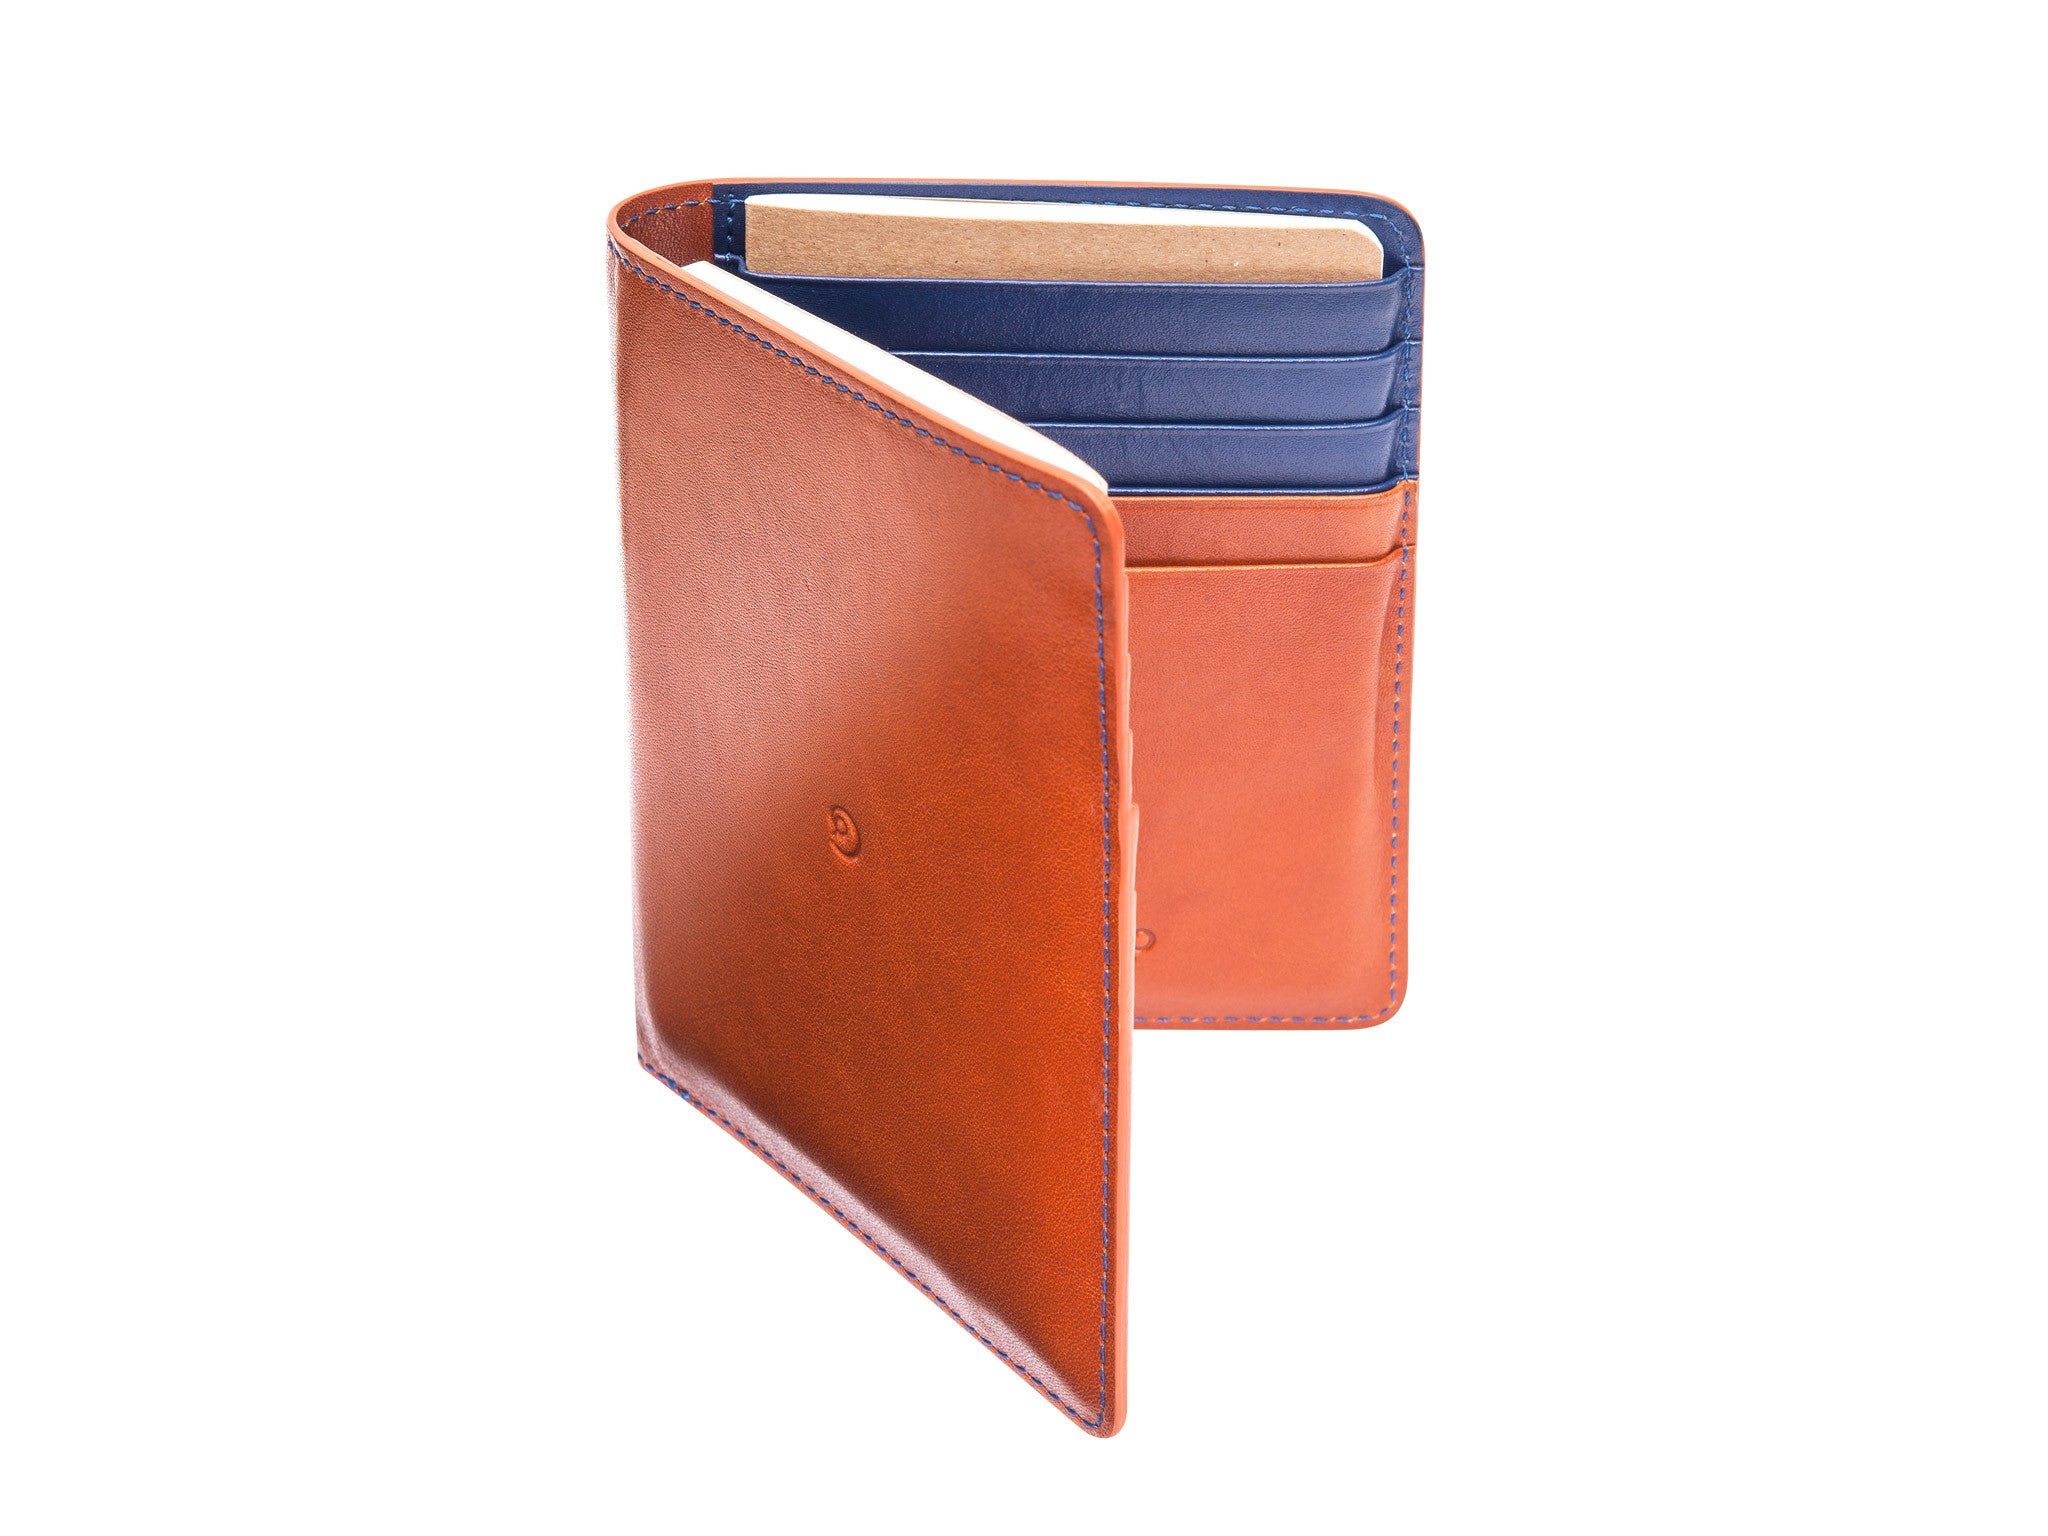 Leather passport wallet brown/blue by Danny P.